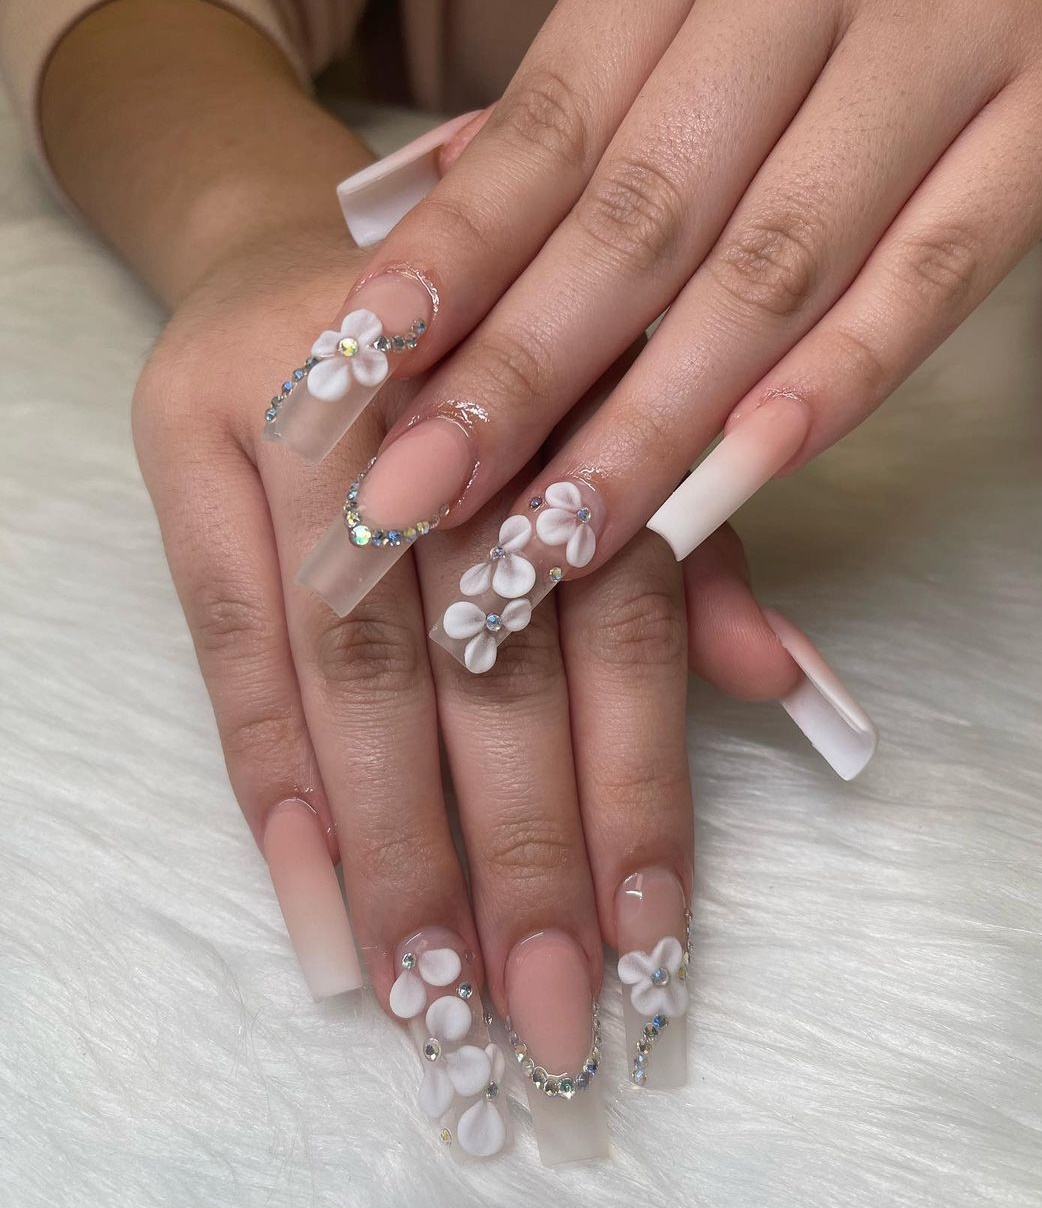 Clear Nails with White Floral Design